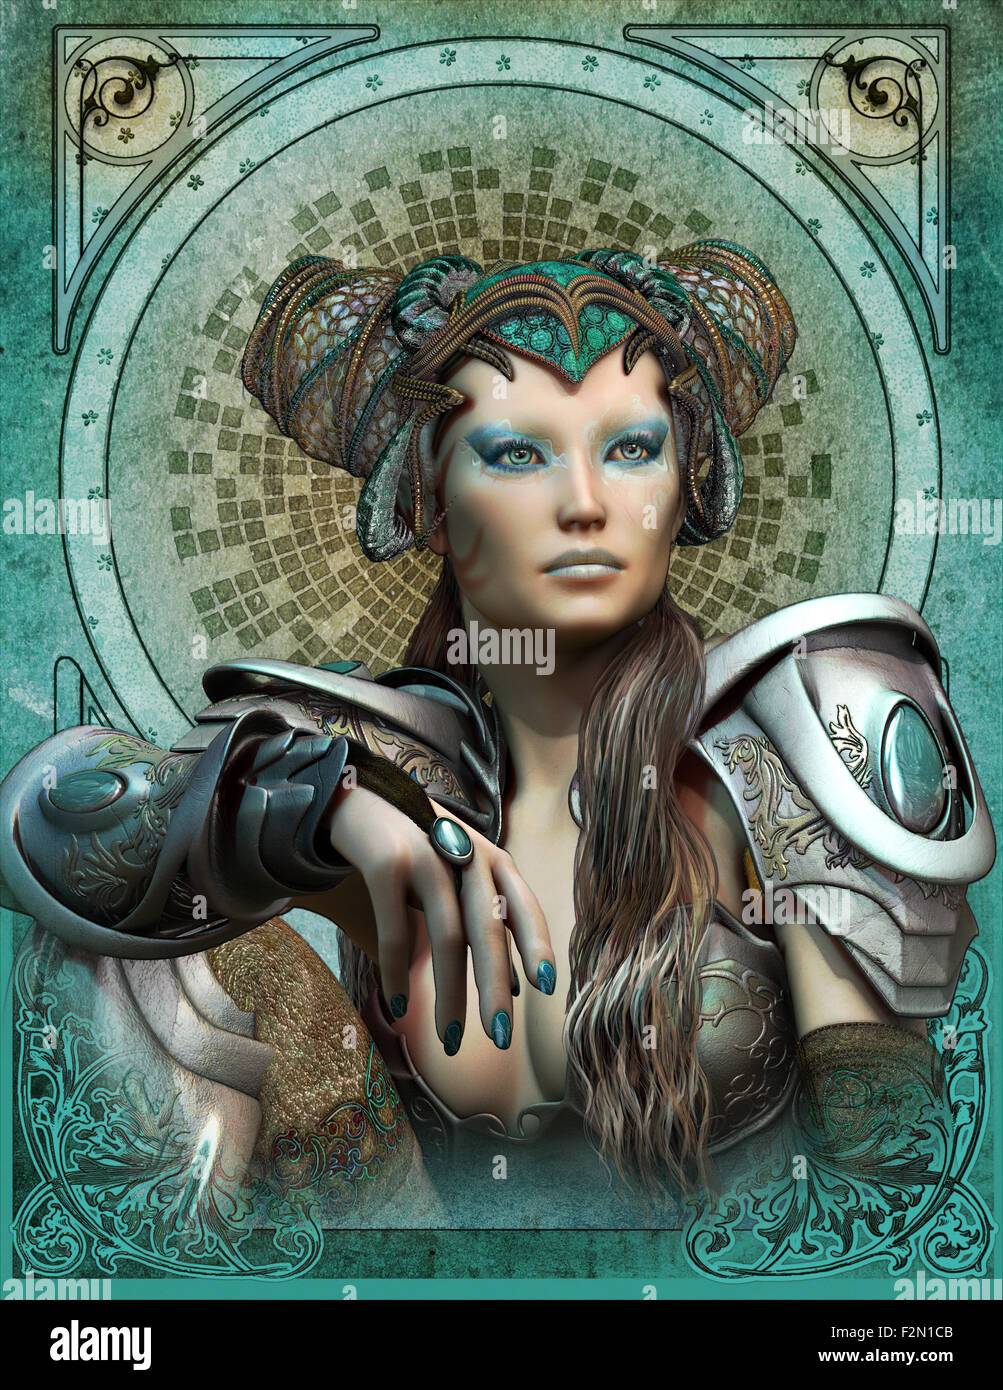 3d computer graphics of a young woman with a fantasy armor and headdress Stock Photo